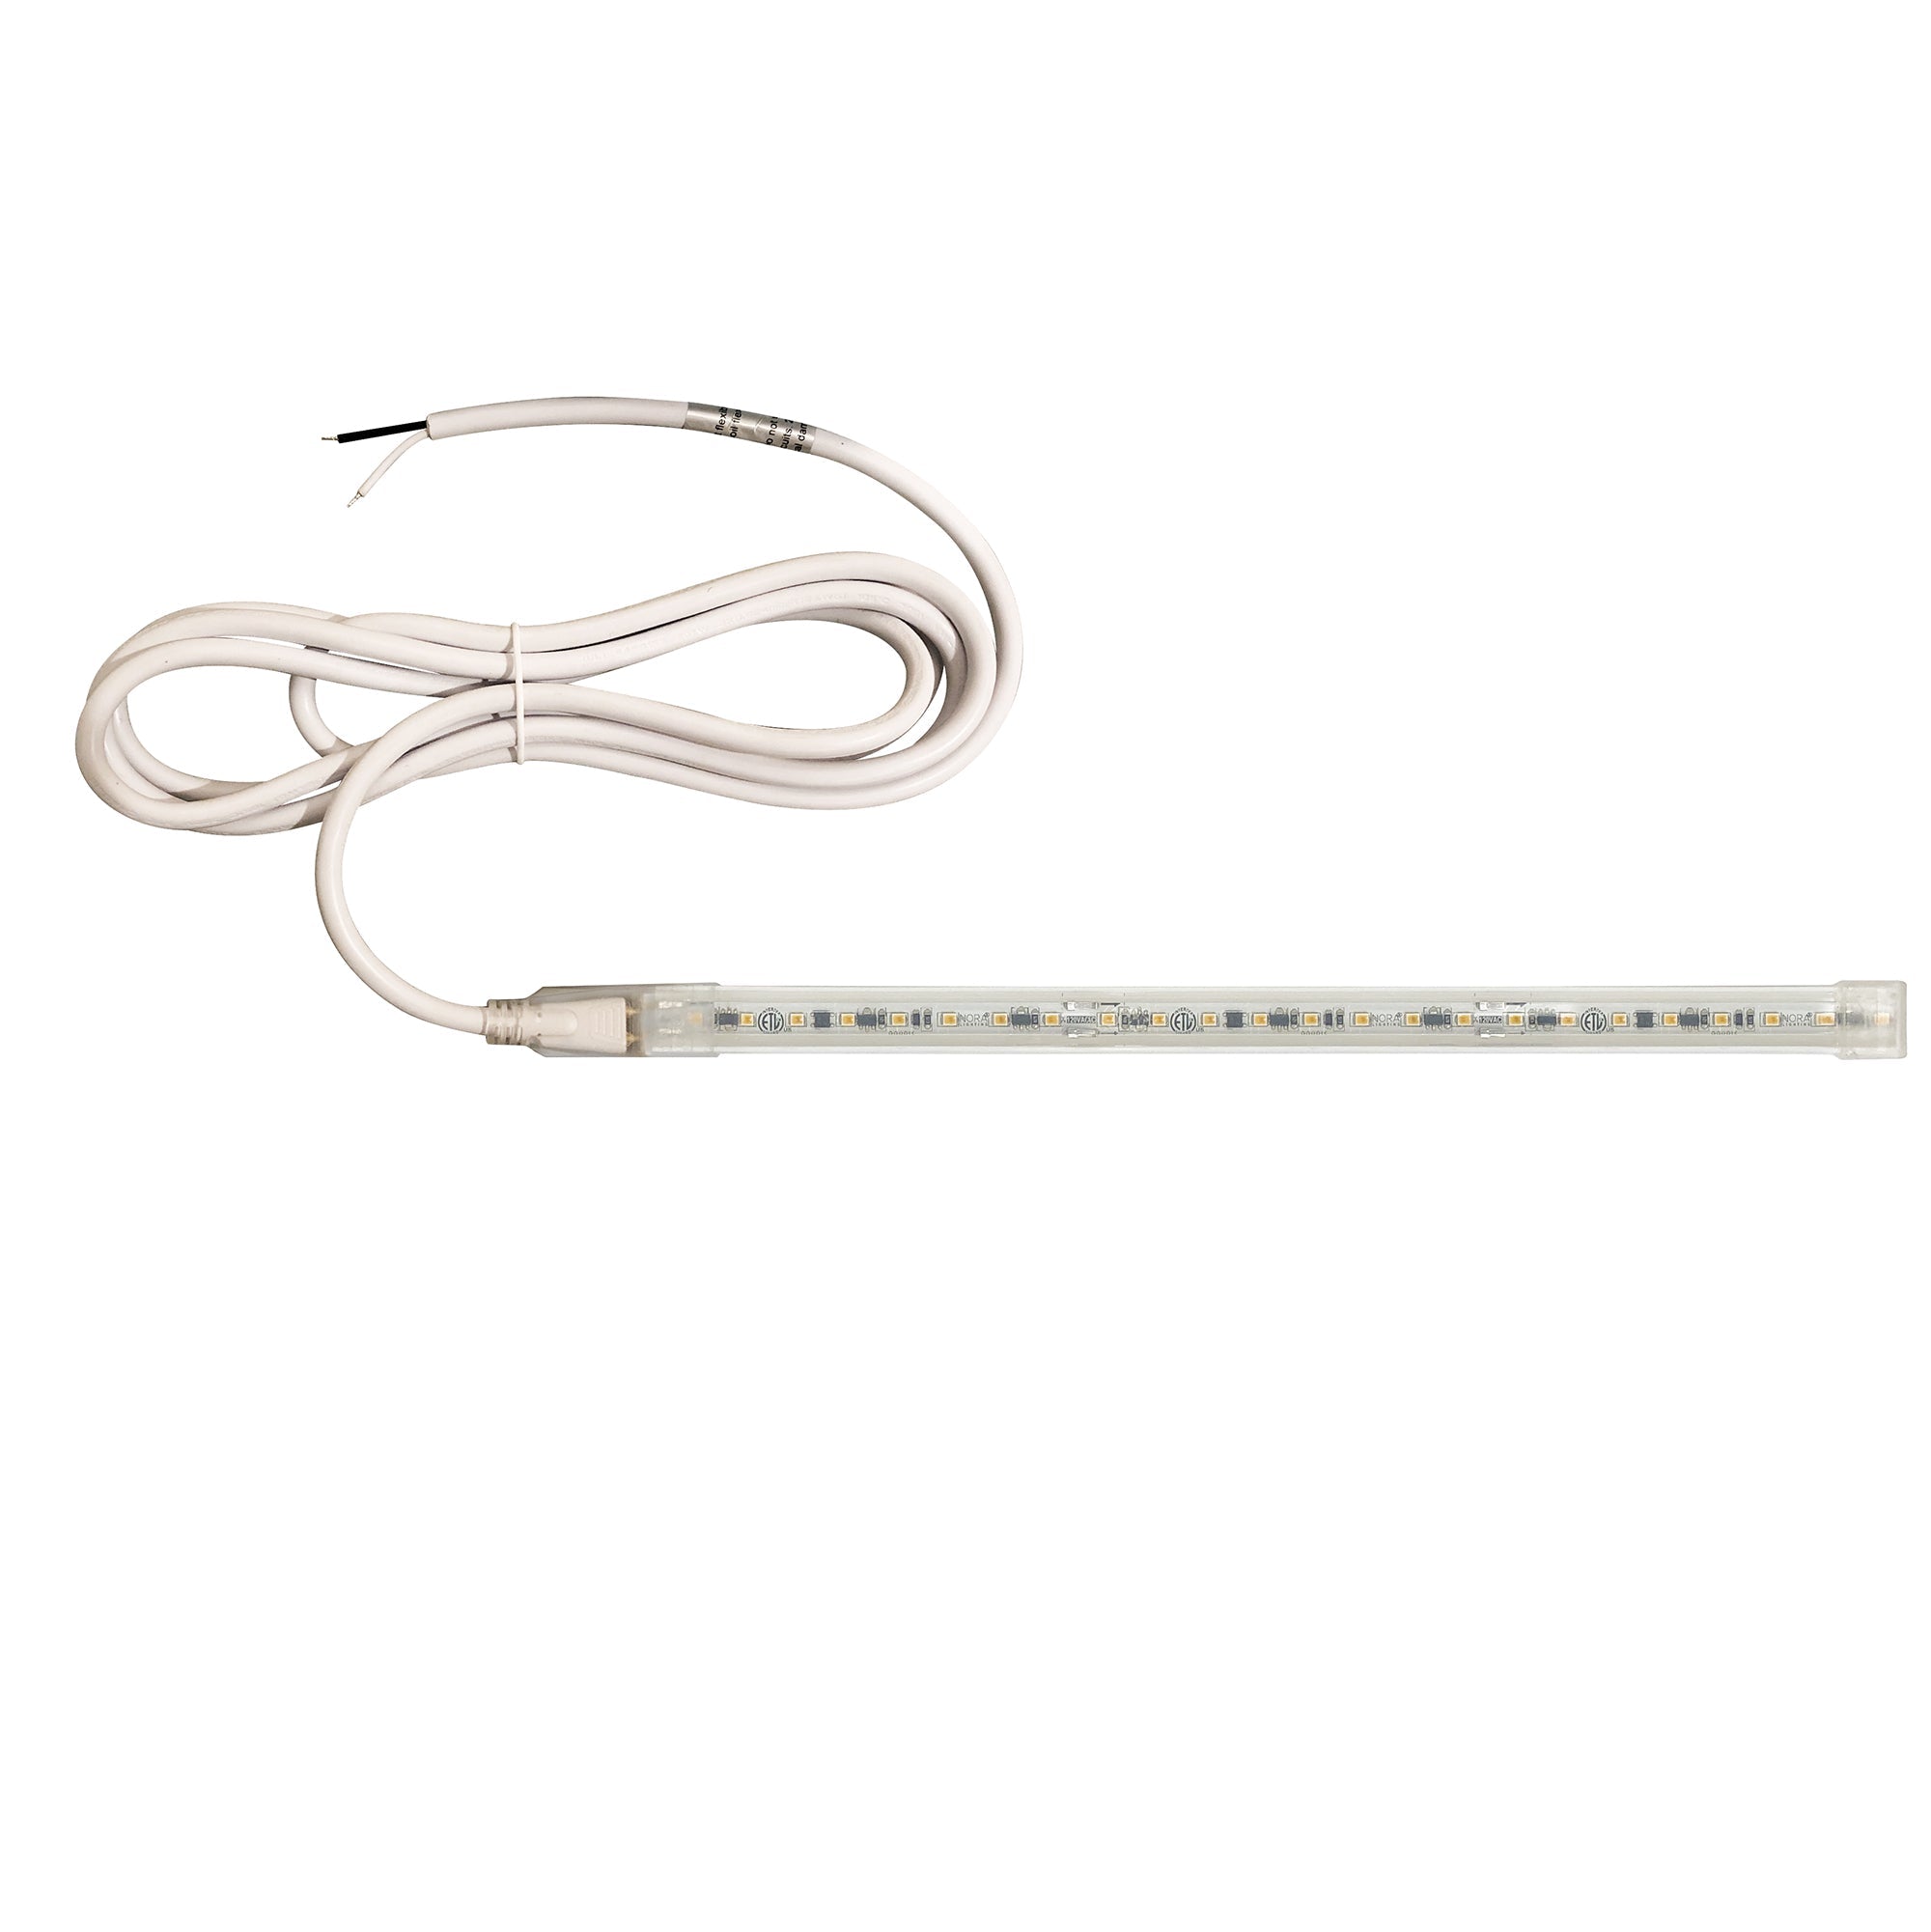 Nora Lighting NUTP13-W12-12-930/HW - Accent / Undercabinet - Custom Cut 12-ft 120V Continuous LED Tape Light, 330lm / 3.6W per foot, 3000K, w/ Mounting Clips and 8' Hardwired Power Cord